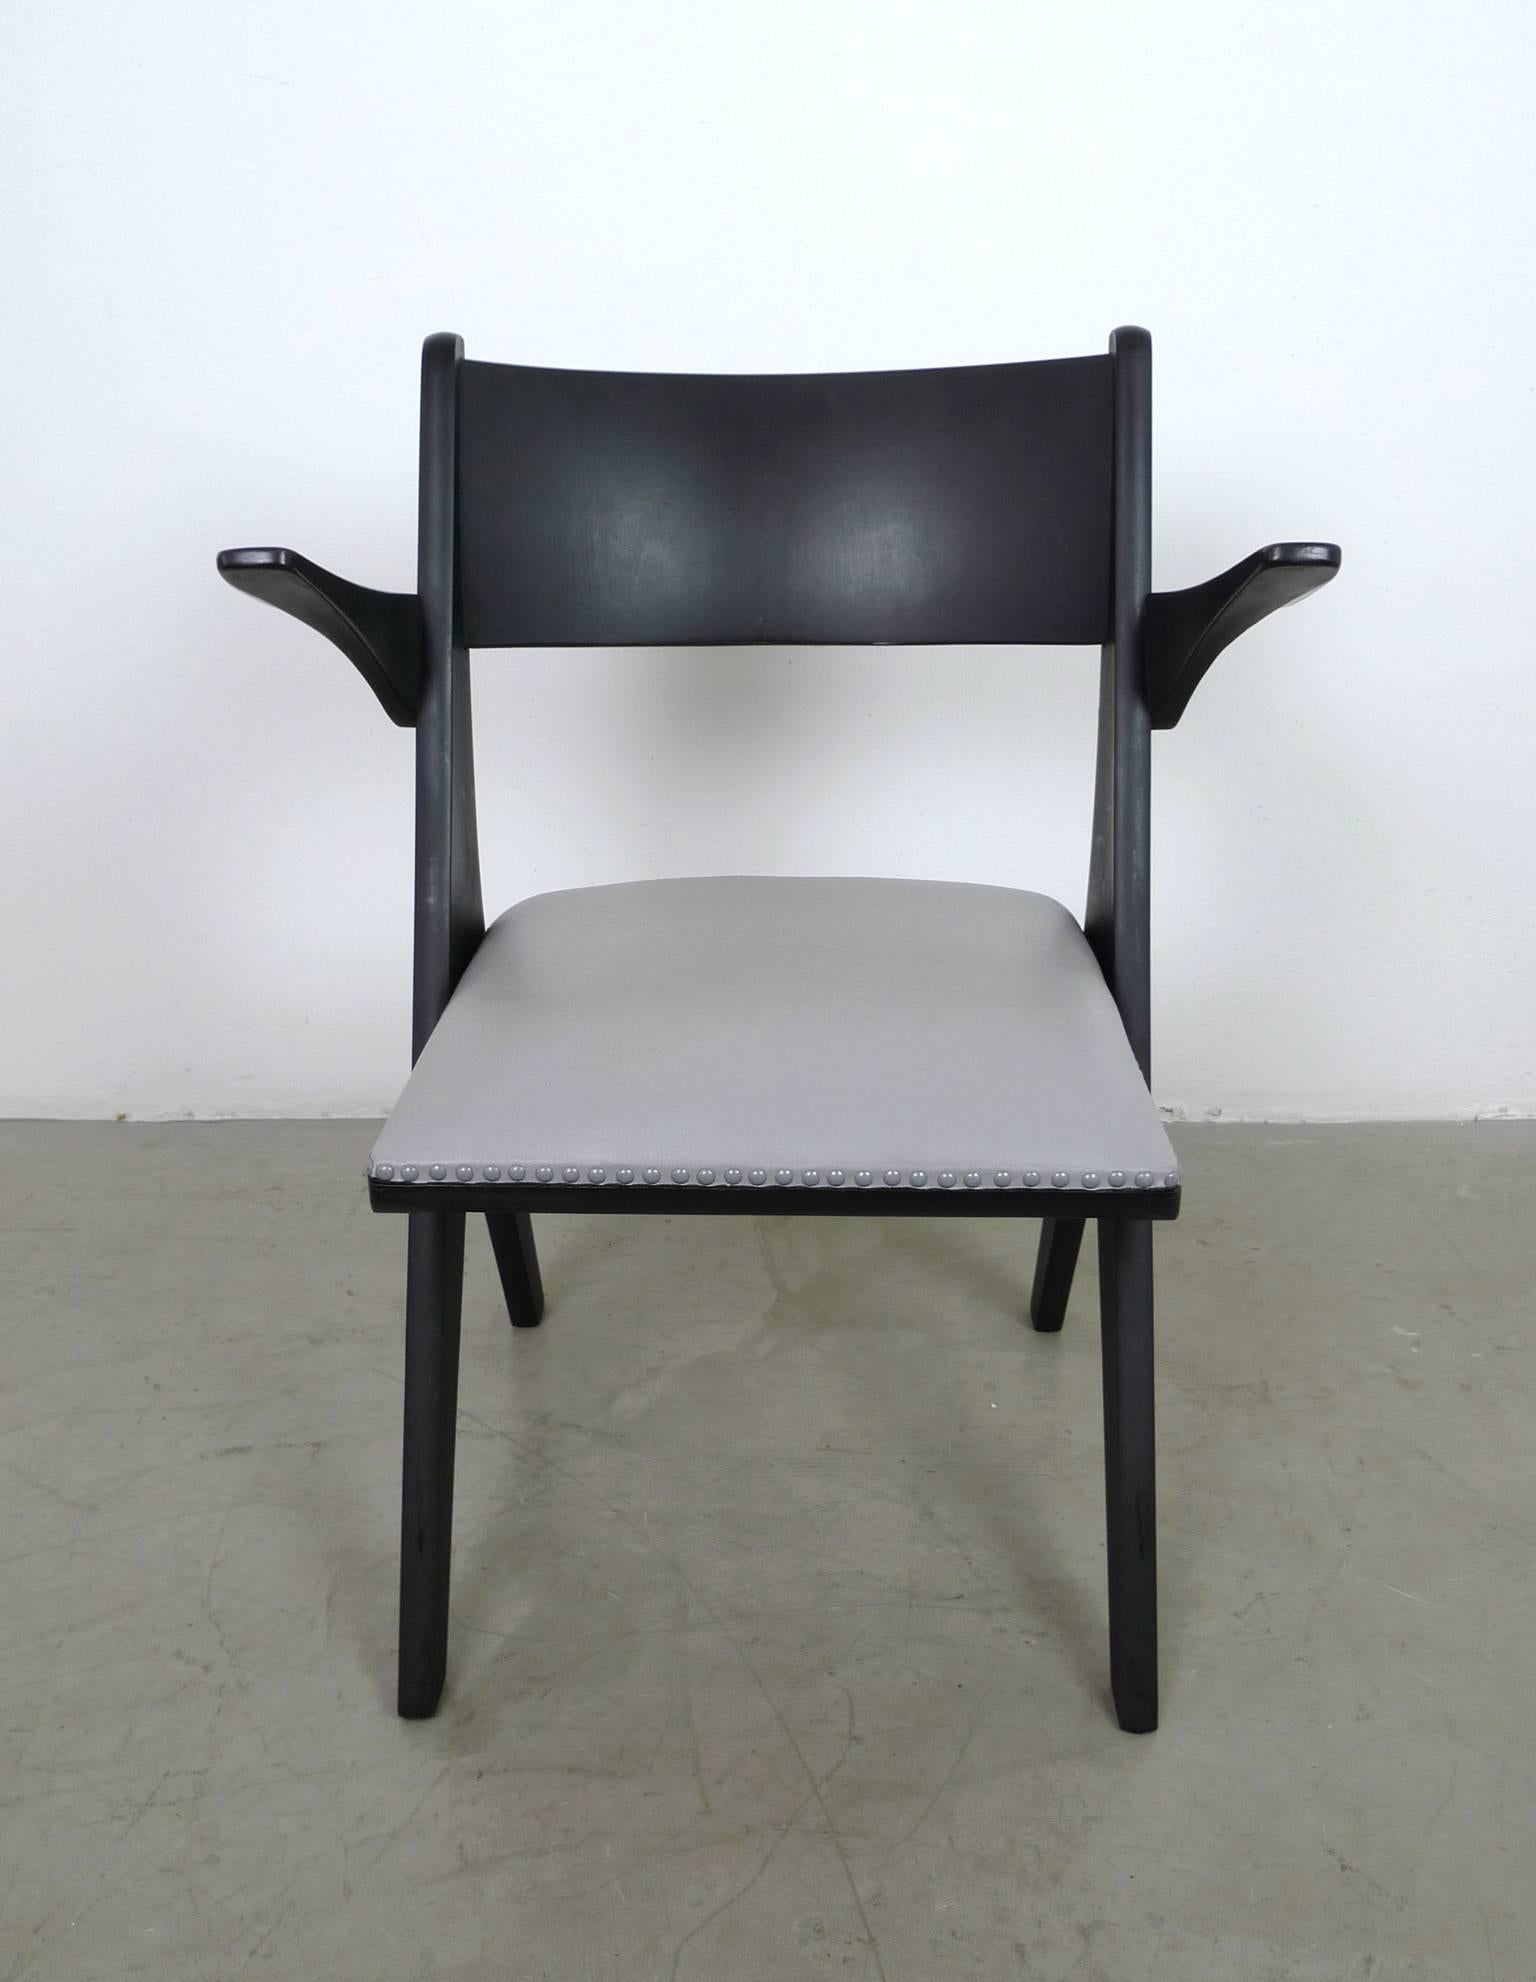 Model penguin armchair from the 1950s designed by Carl Sasse and produced by Casala in Germany.
The black stained beech frame holds a vinyl-covered seat cushion in grey, which is fastened with ornamental nails.
This chair is in very good vintage